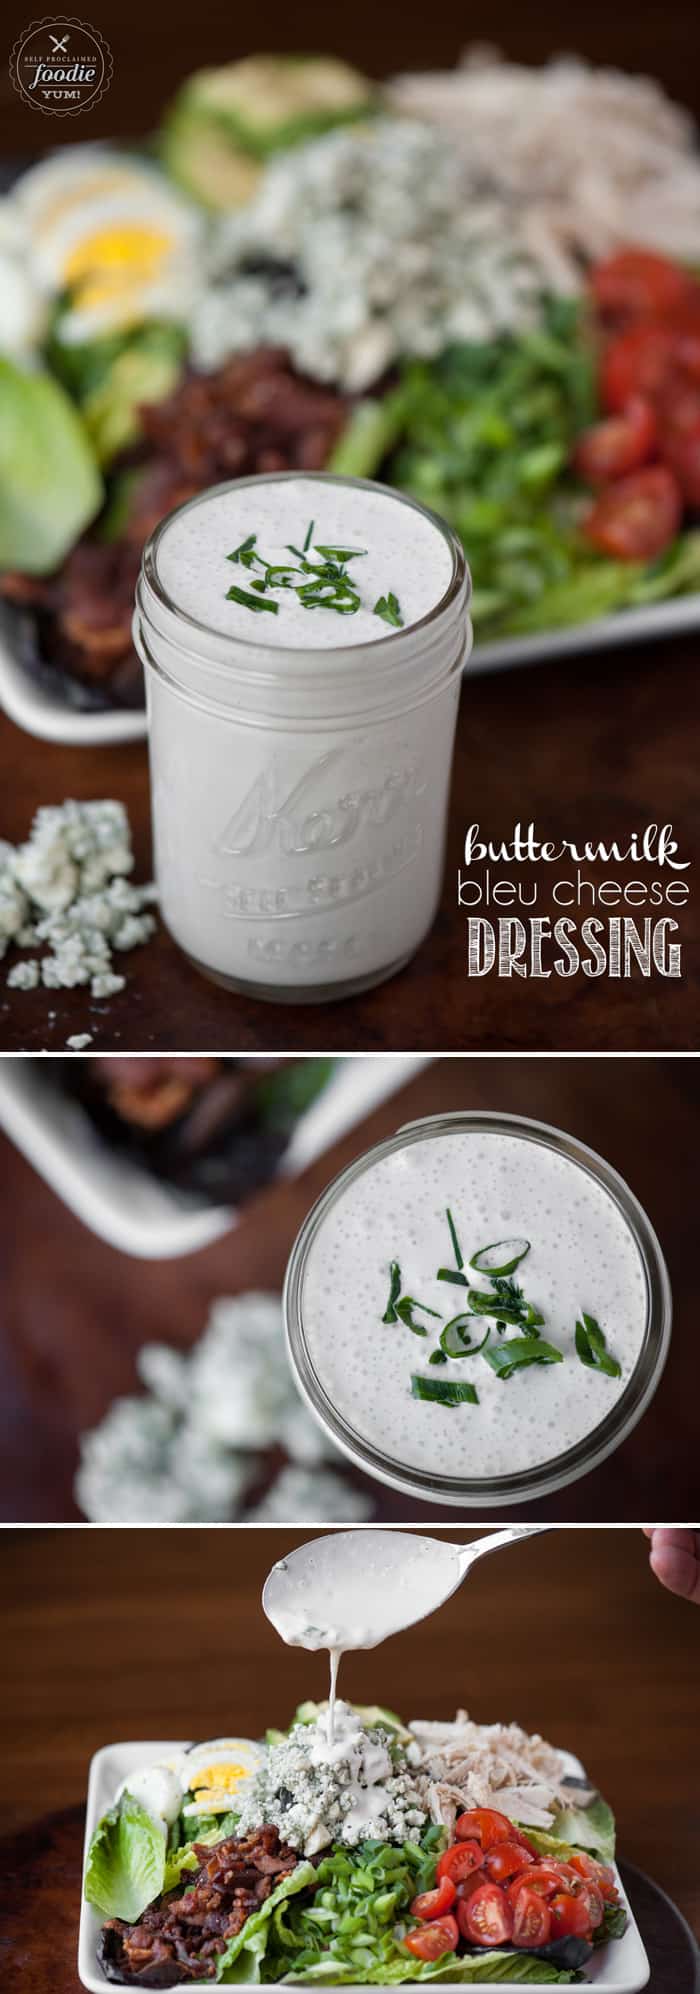 Its super easy to make your own homemade Buttermilk Bleu Cheese Dressing. The end result is a super tasty dressing or dip that is made without any additives.